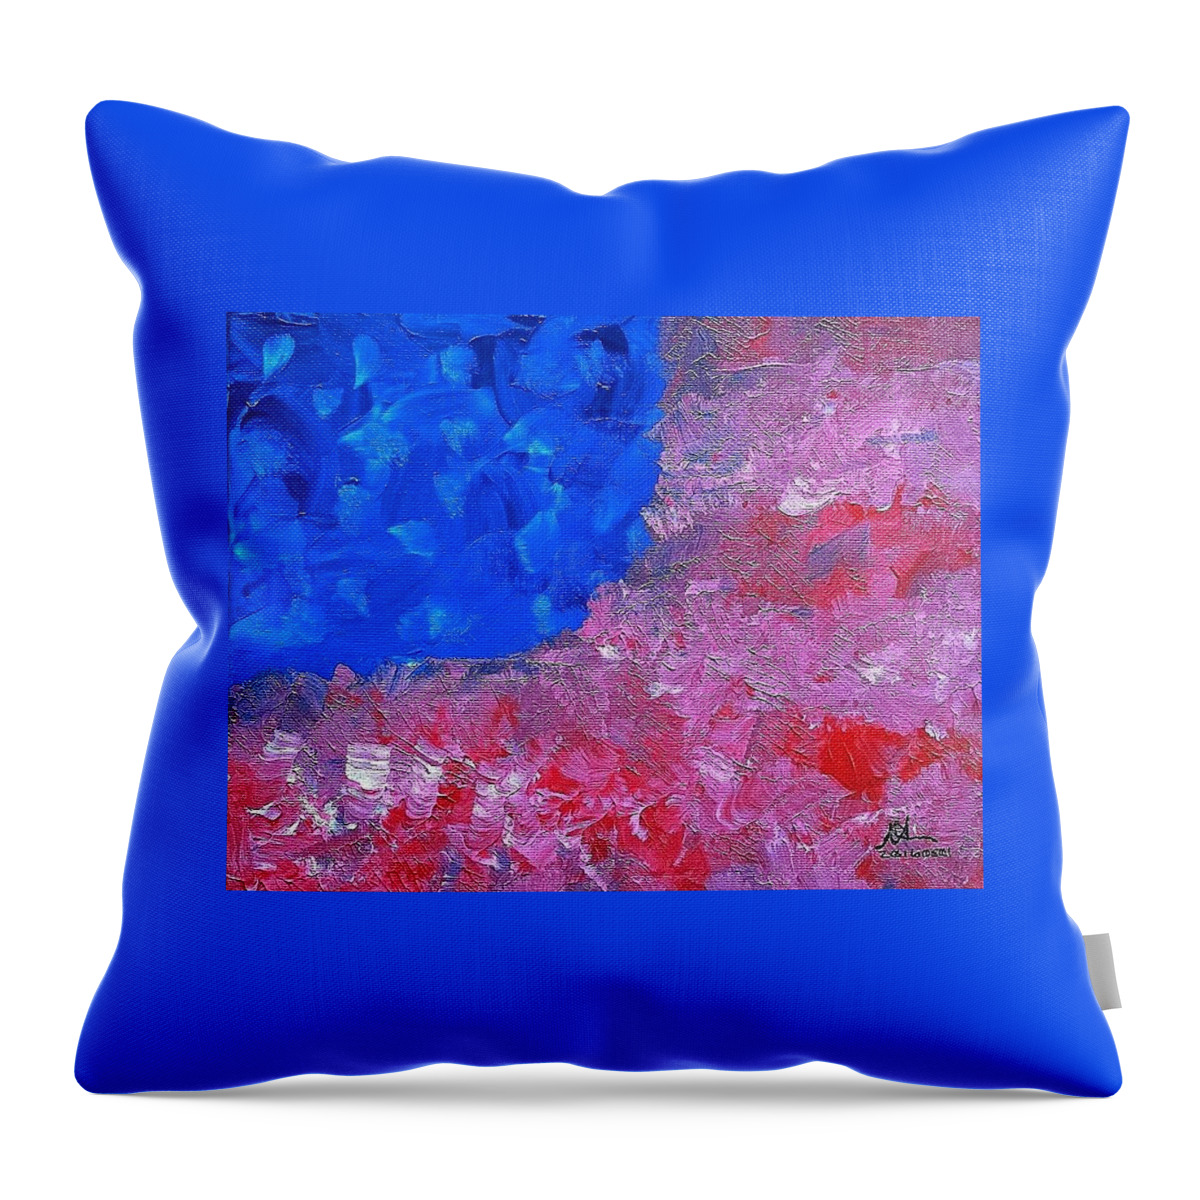 Old Glory Throw Pillow featuring the painting Old Glory by Mark C Jackson